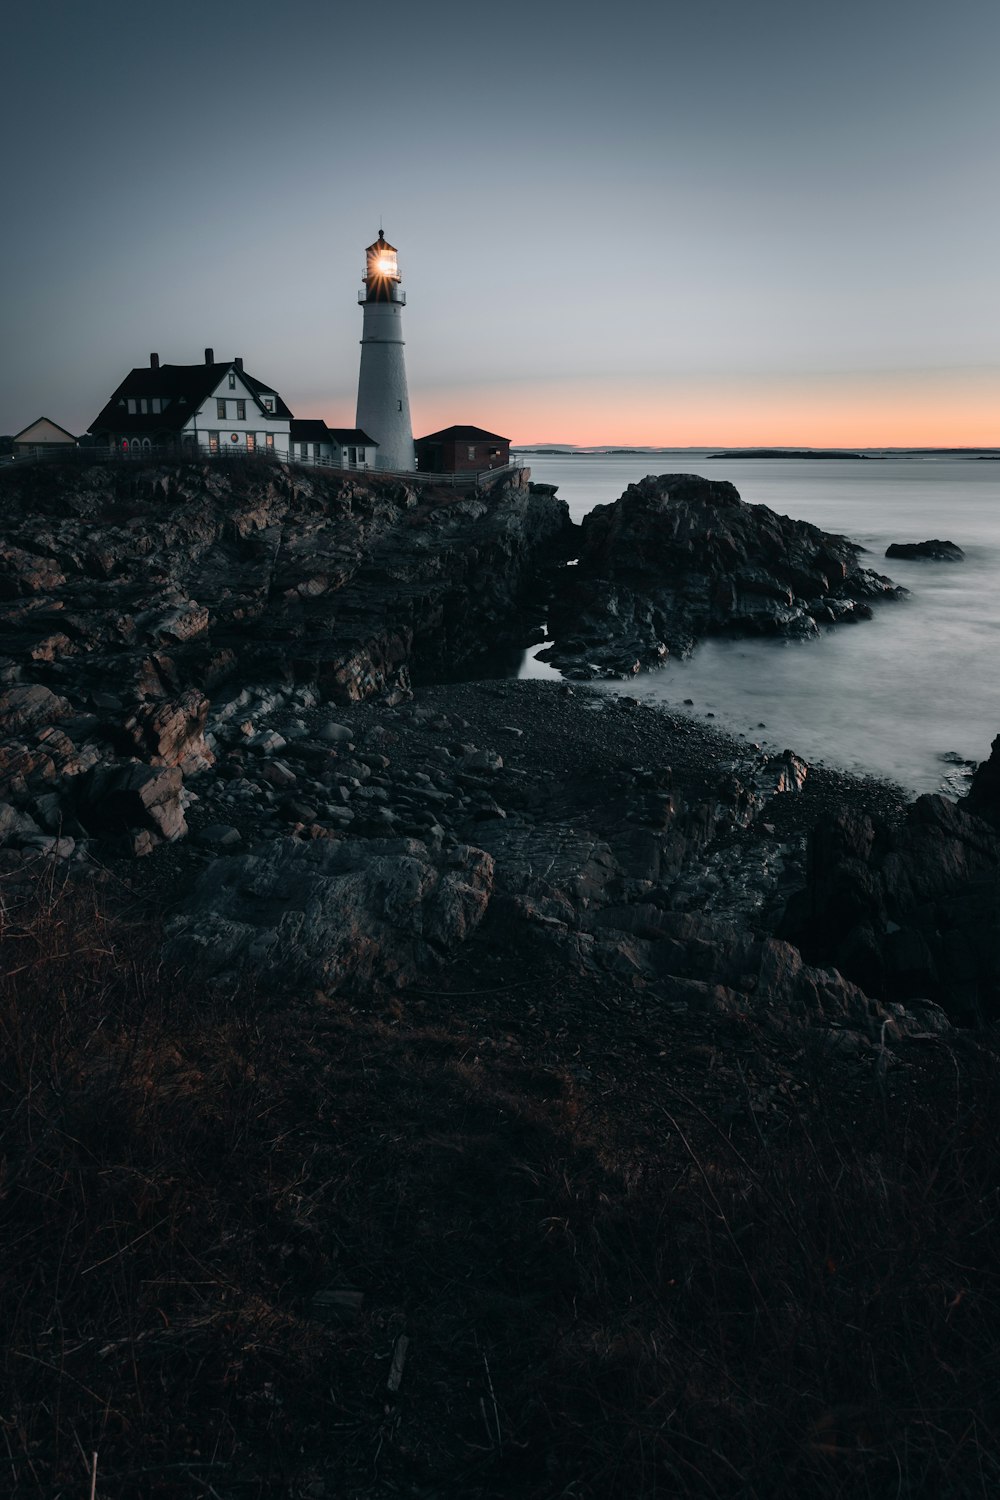 white and black lighthouse on rocky shore during sunset